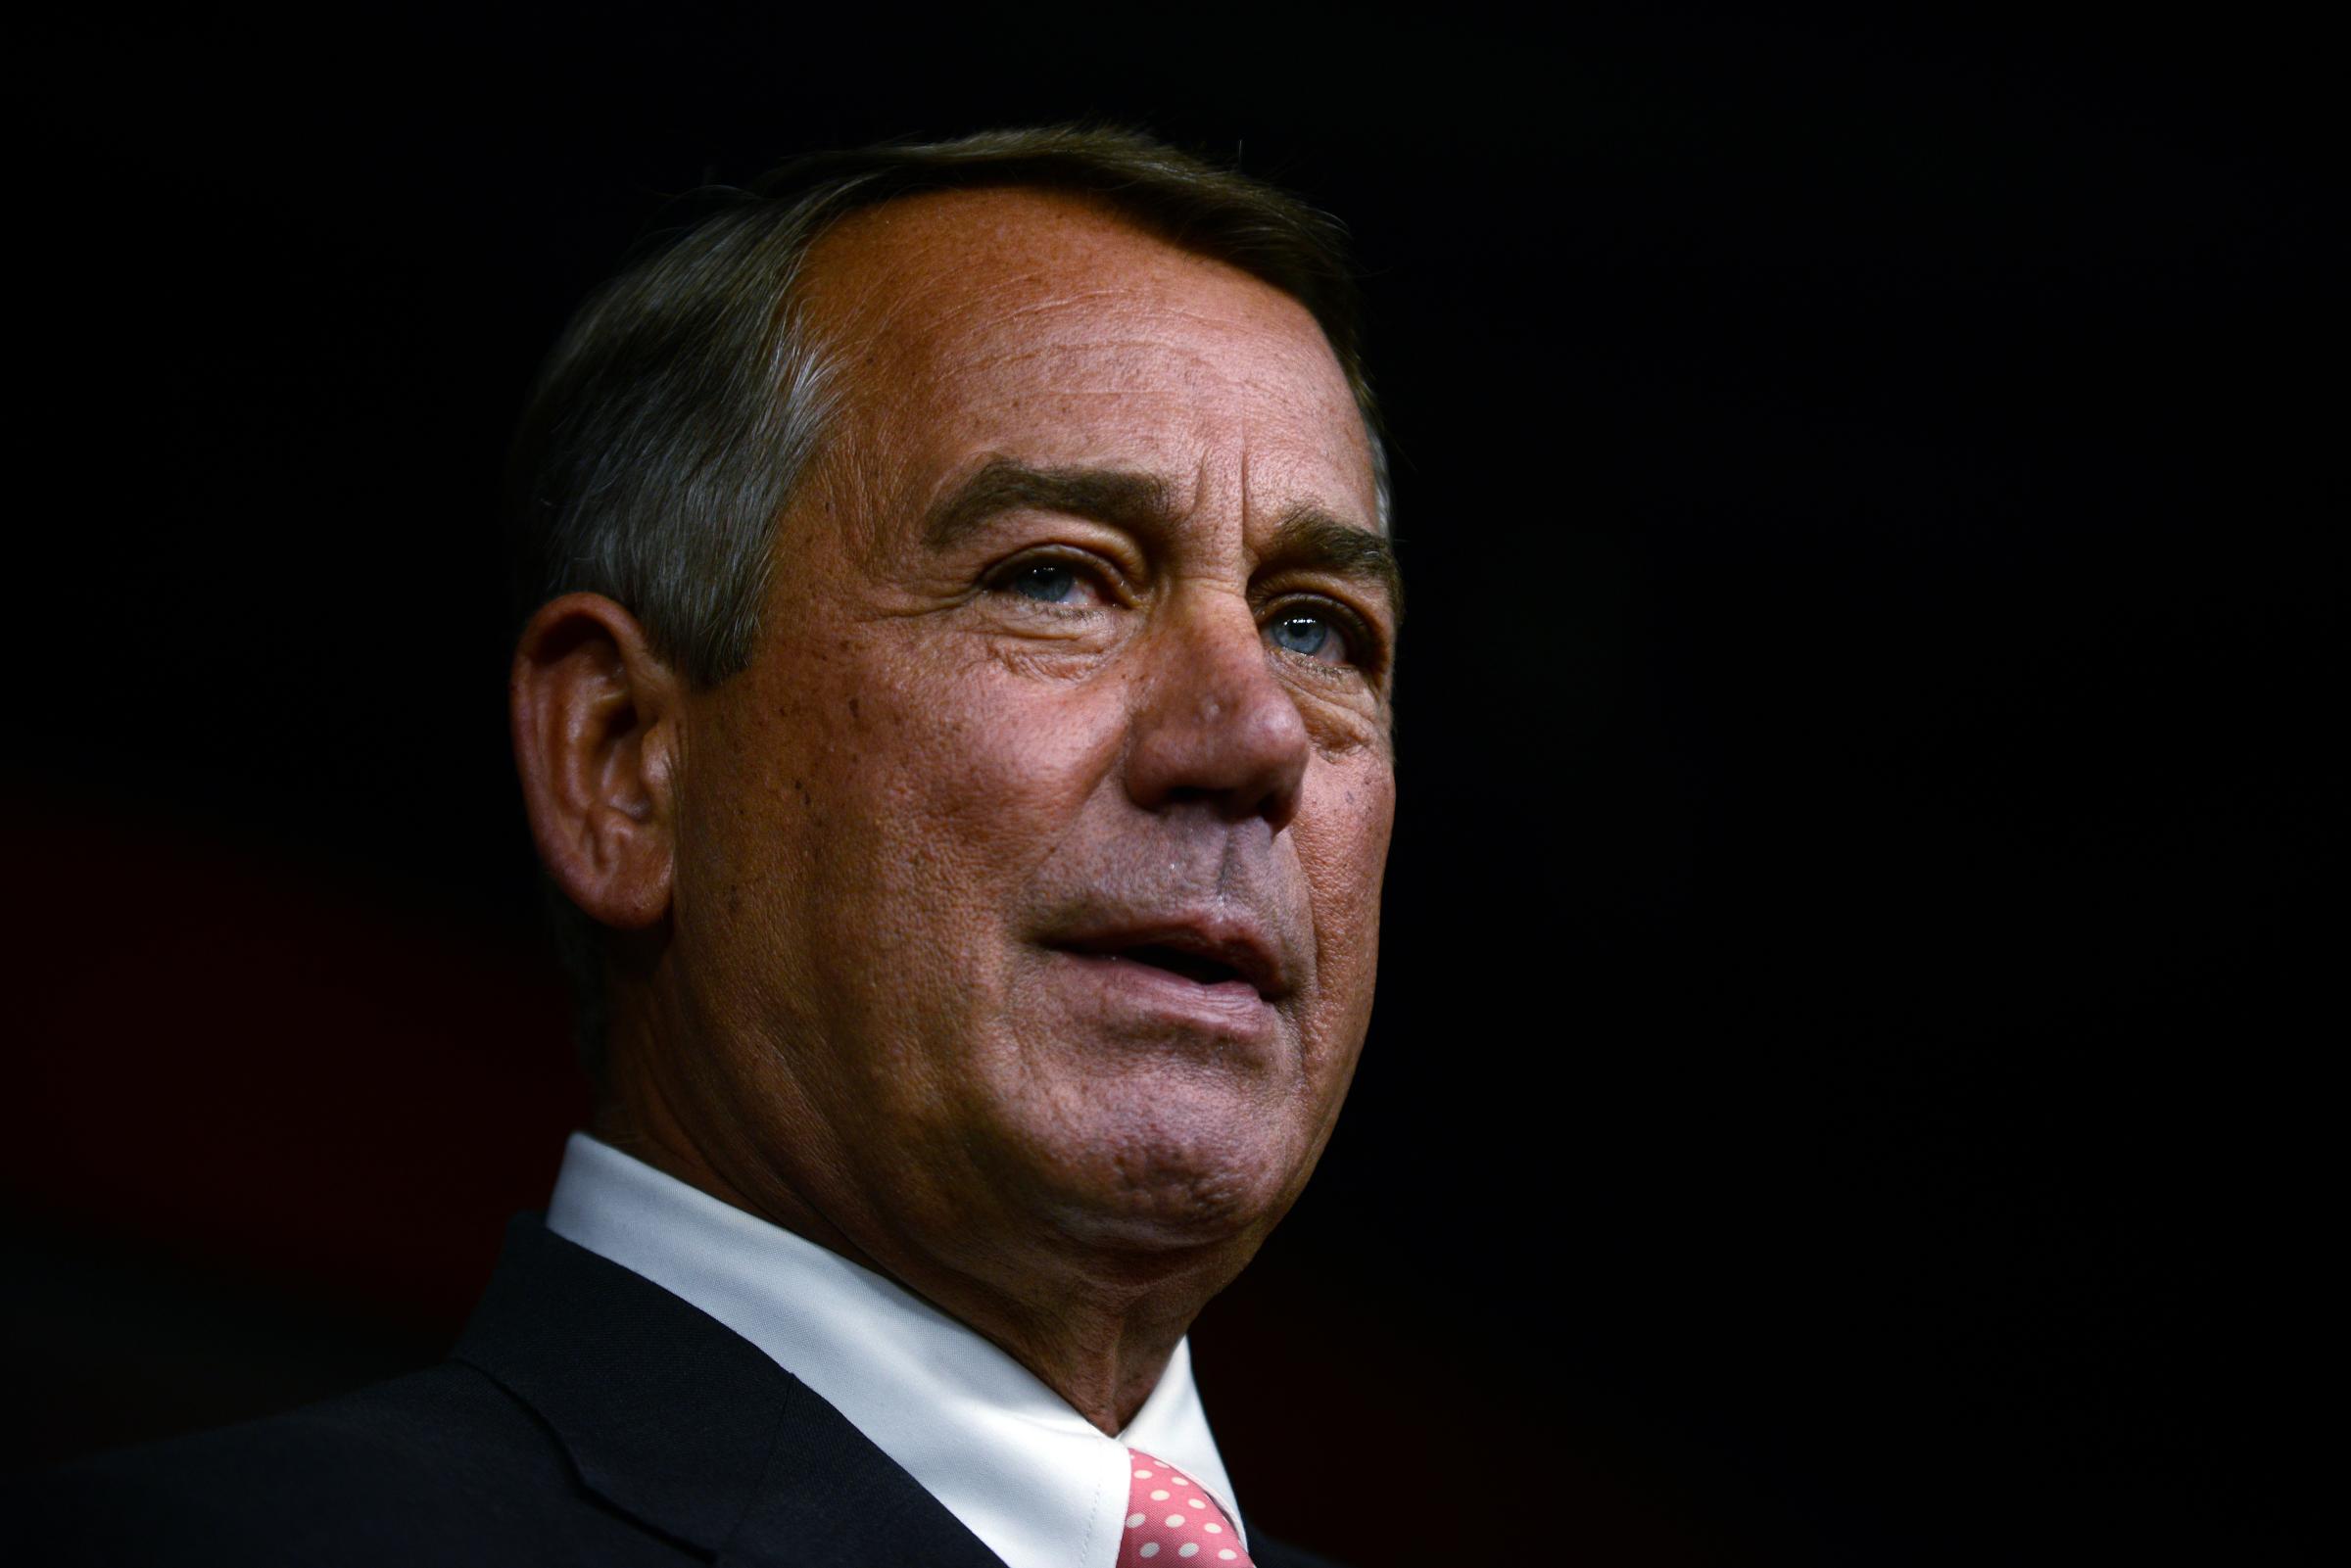 WASHINGTON, DC - SEPTEMBER 25: House Speaker John Boehner leaves after announcing his resignation on Capitol Hill in Washington, D.C., September 25, 2015. He left without any comments or answers of reporters. (Photo by Astrid Riecken/Getty Images)